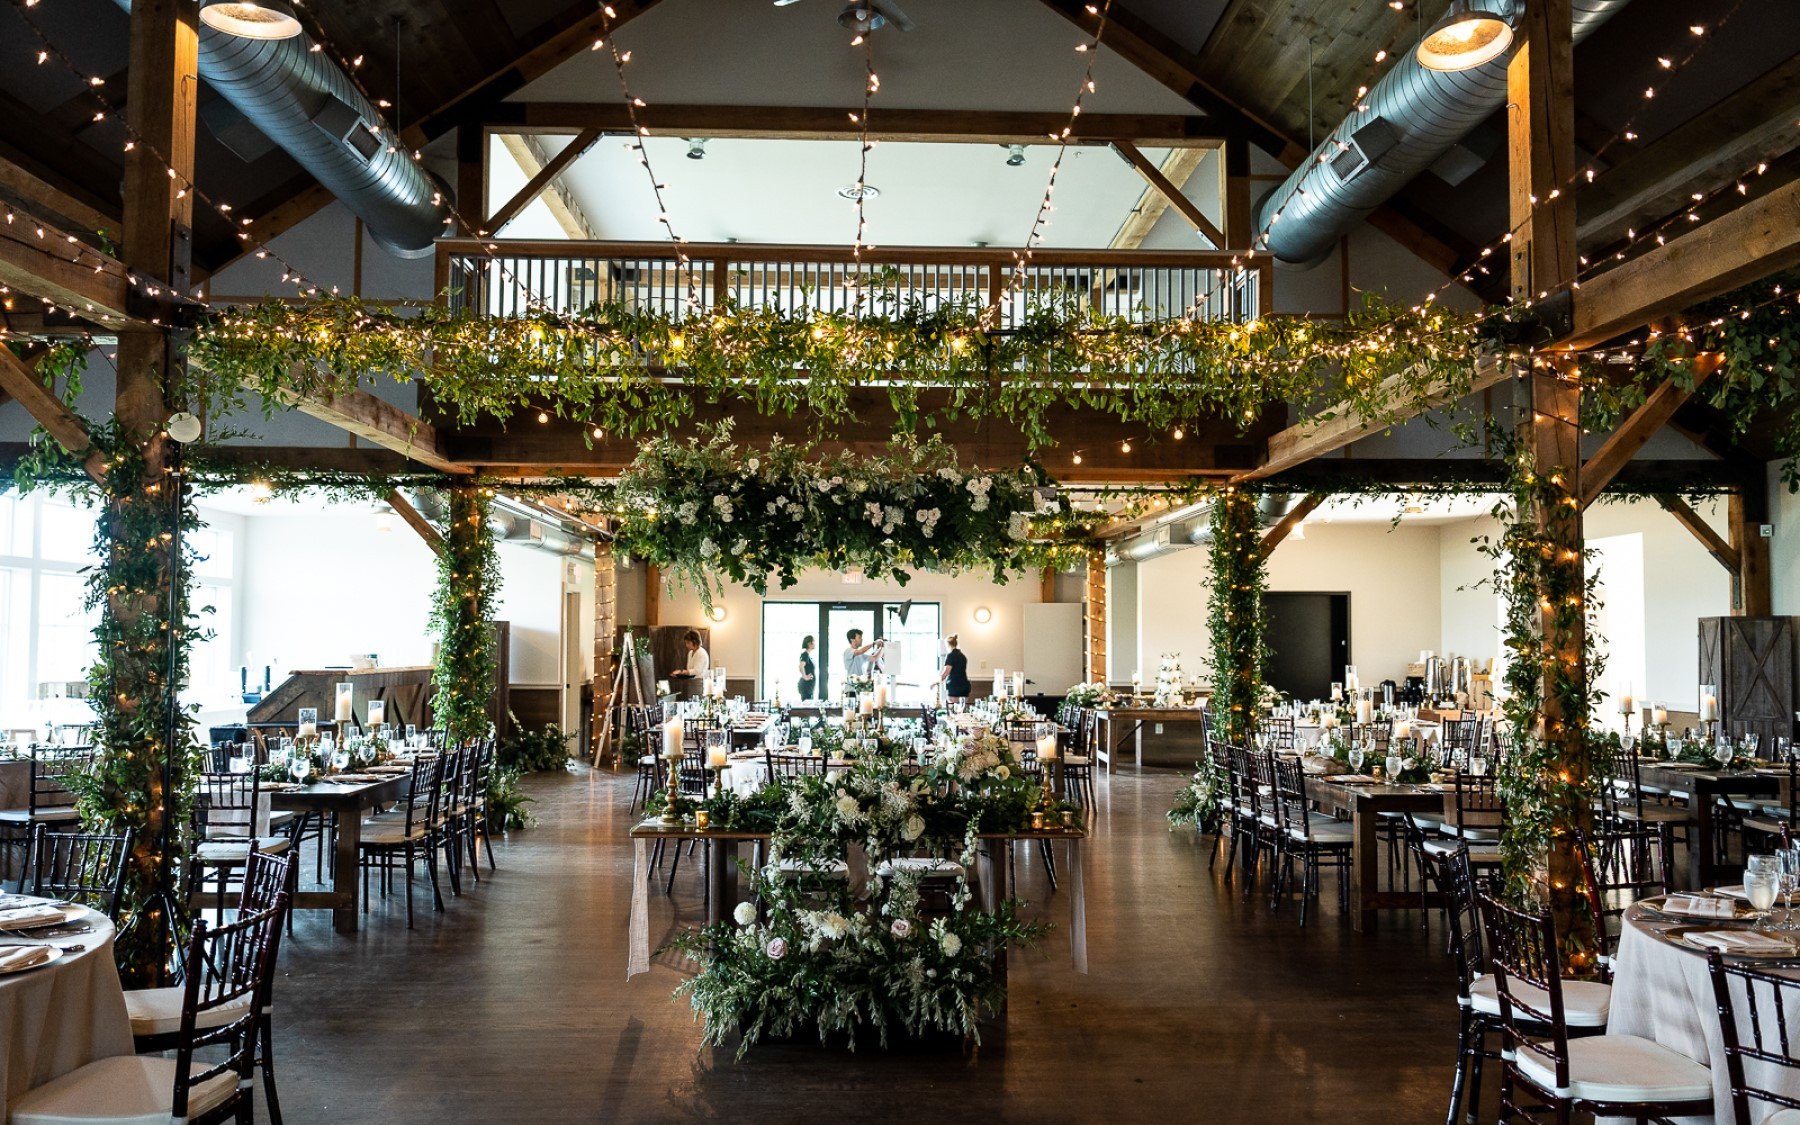 event barn photo featuring greenery on ceiling and rafters with the sweetheart table centered.